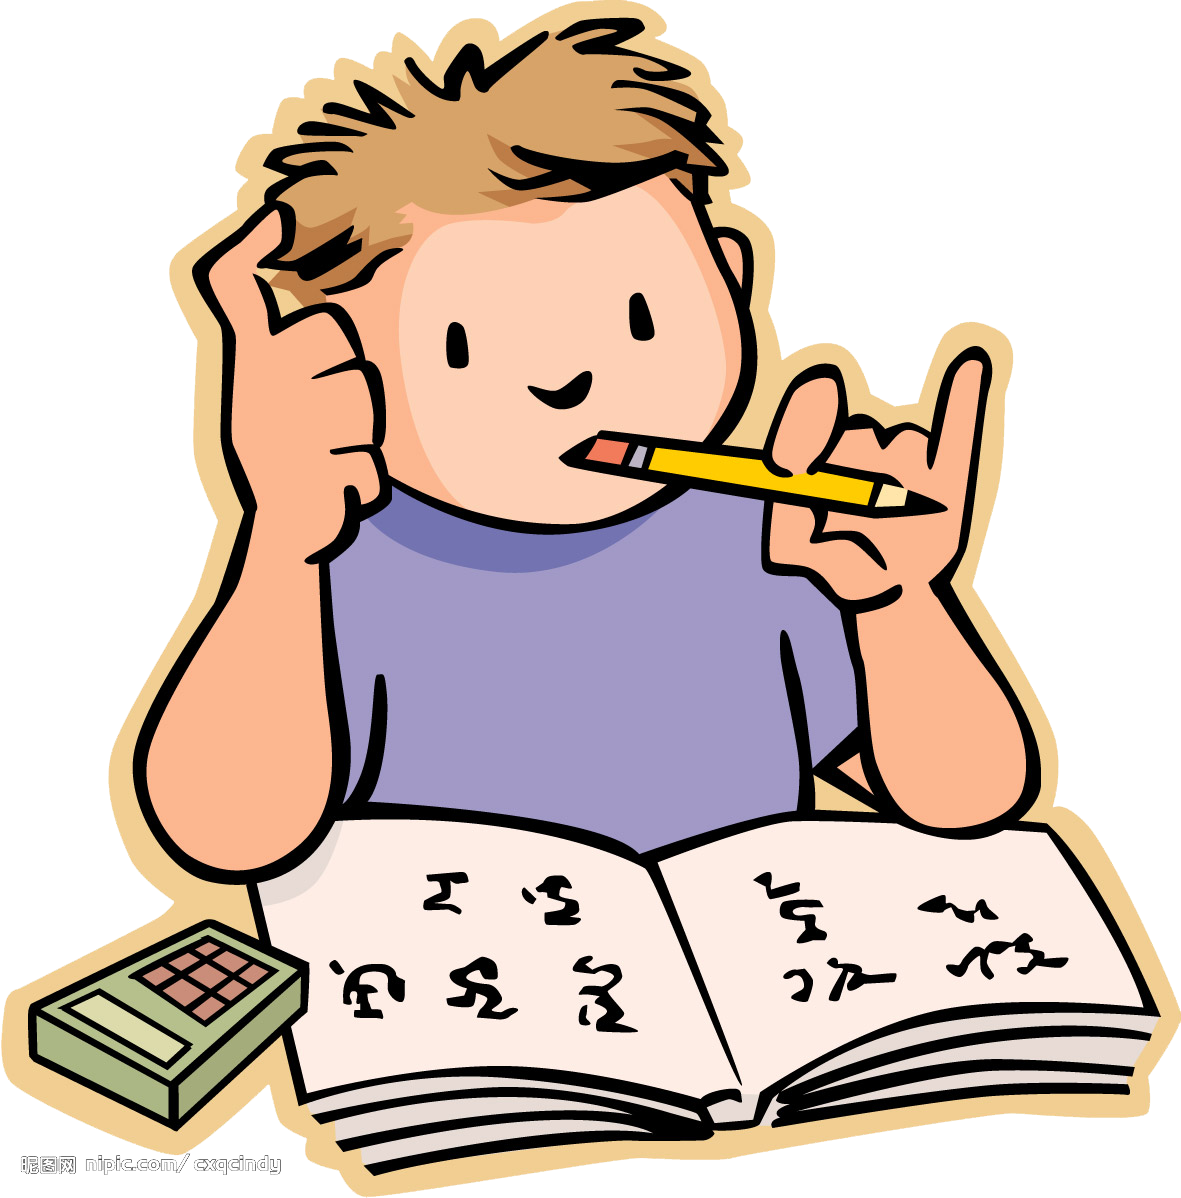 Homework writing Education Student - aso cartoon png download - 1181*1198 -  Free Transparent Homework png Download. - Clip Art Library